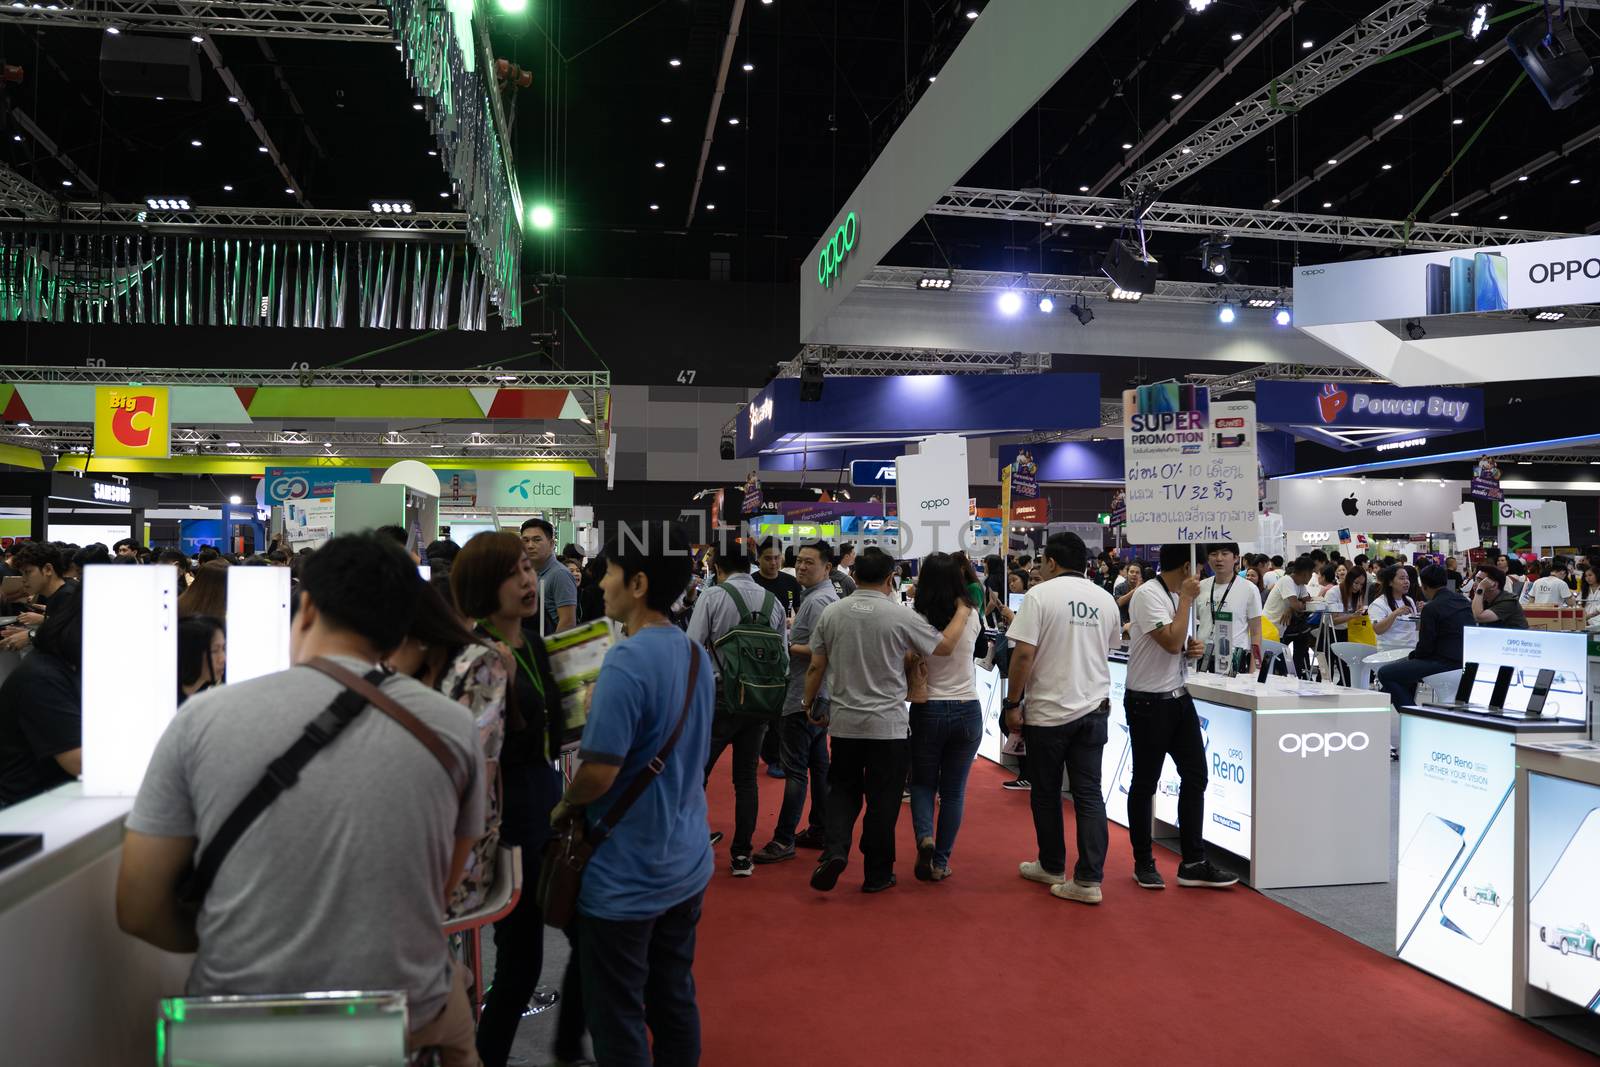 Bangkok, Thailand Oct 04, 2019 : Thailand Mobile Expo, Mobile phone Trade fair,a lot of people are here to buy smartphone during Oct 3-6, 2019 in Bangkok, Thailand. by peerapixs